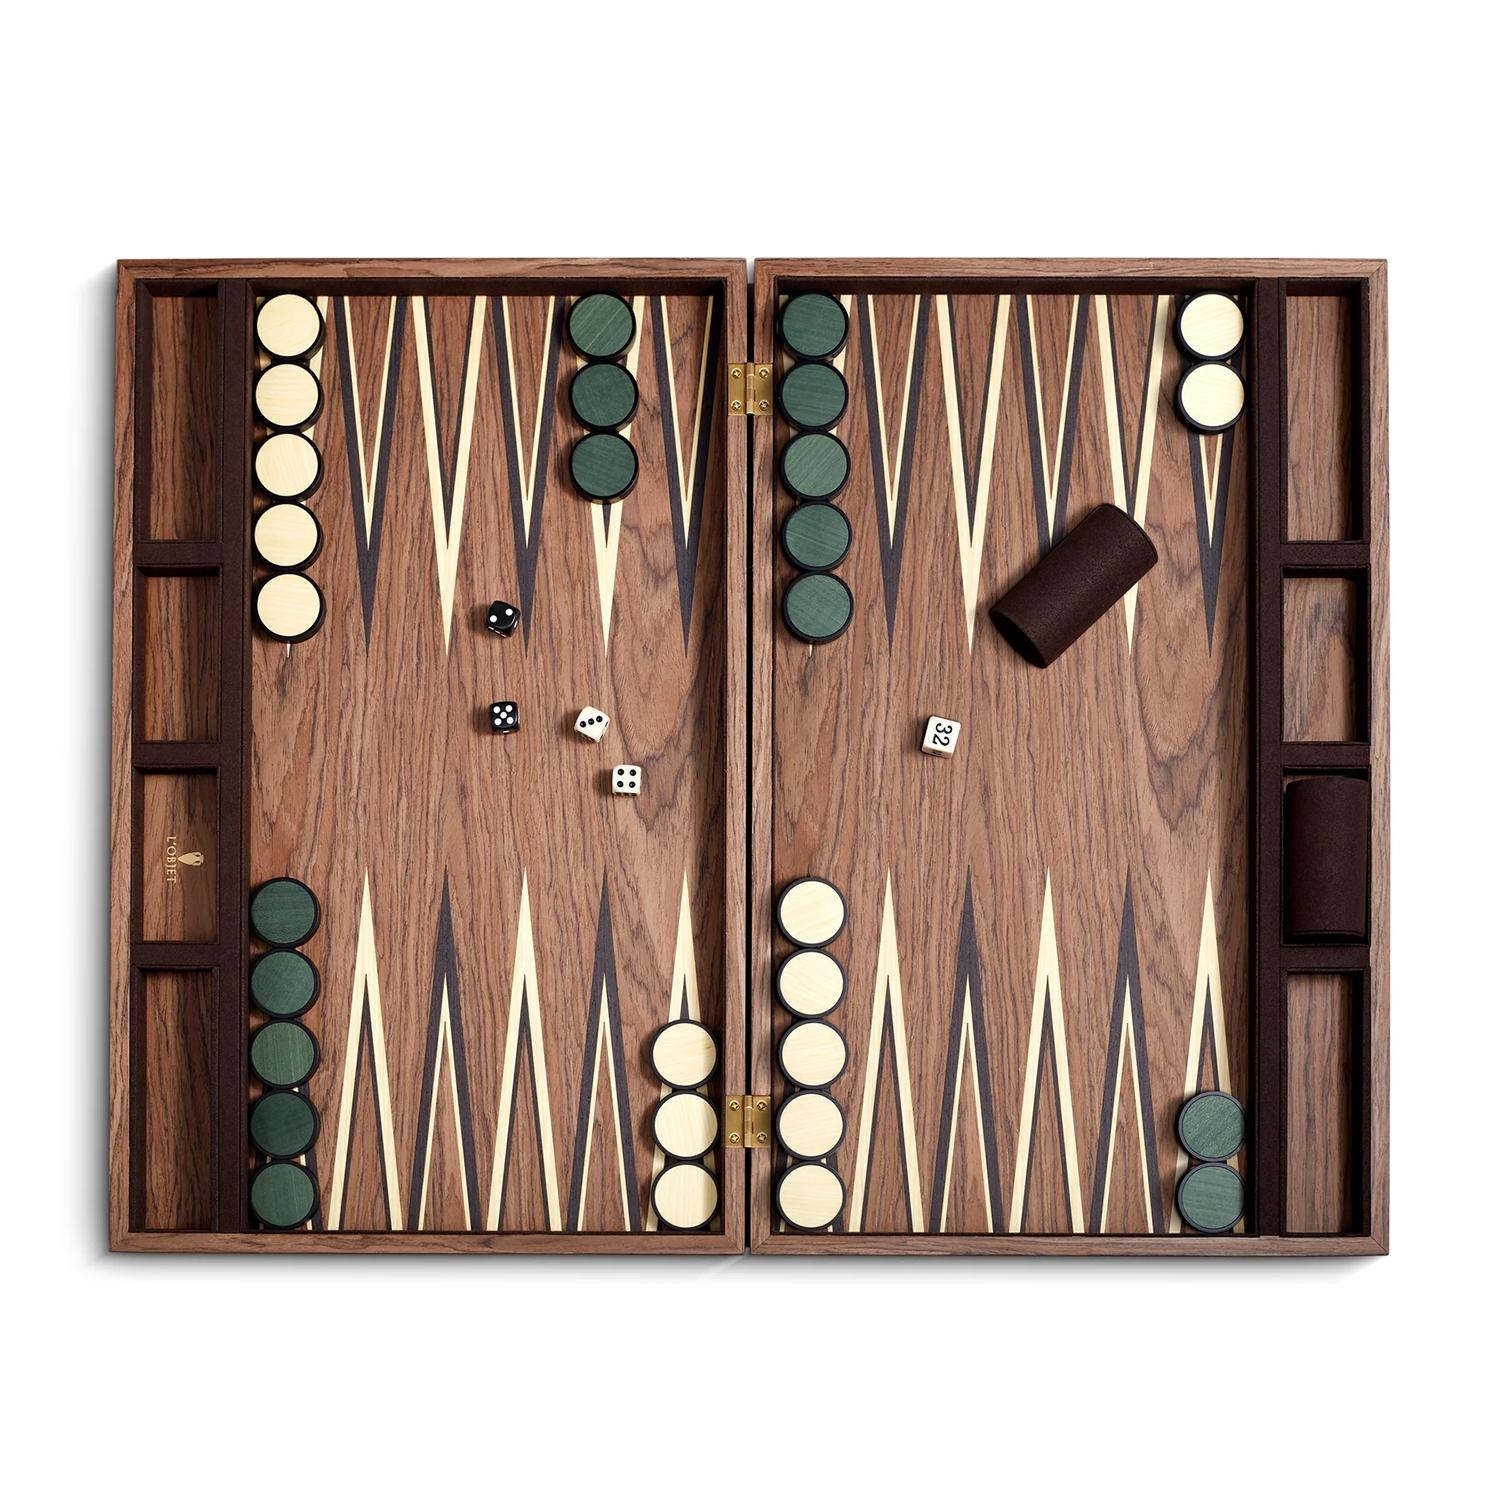 Backgammon Rodan Walnut with all structure in solid ash wood
in walnut stained finish, with pawns made with ivory and with suede 
leather backing in english green color.
Dimensions of the games closed box: L49 x D31 x H6cm.
Dimensions of the